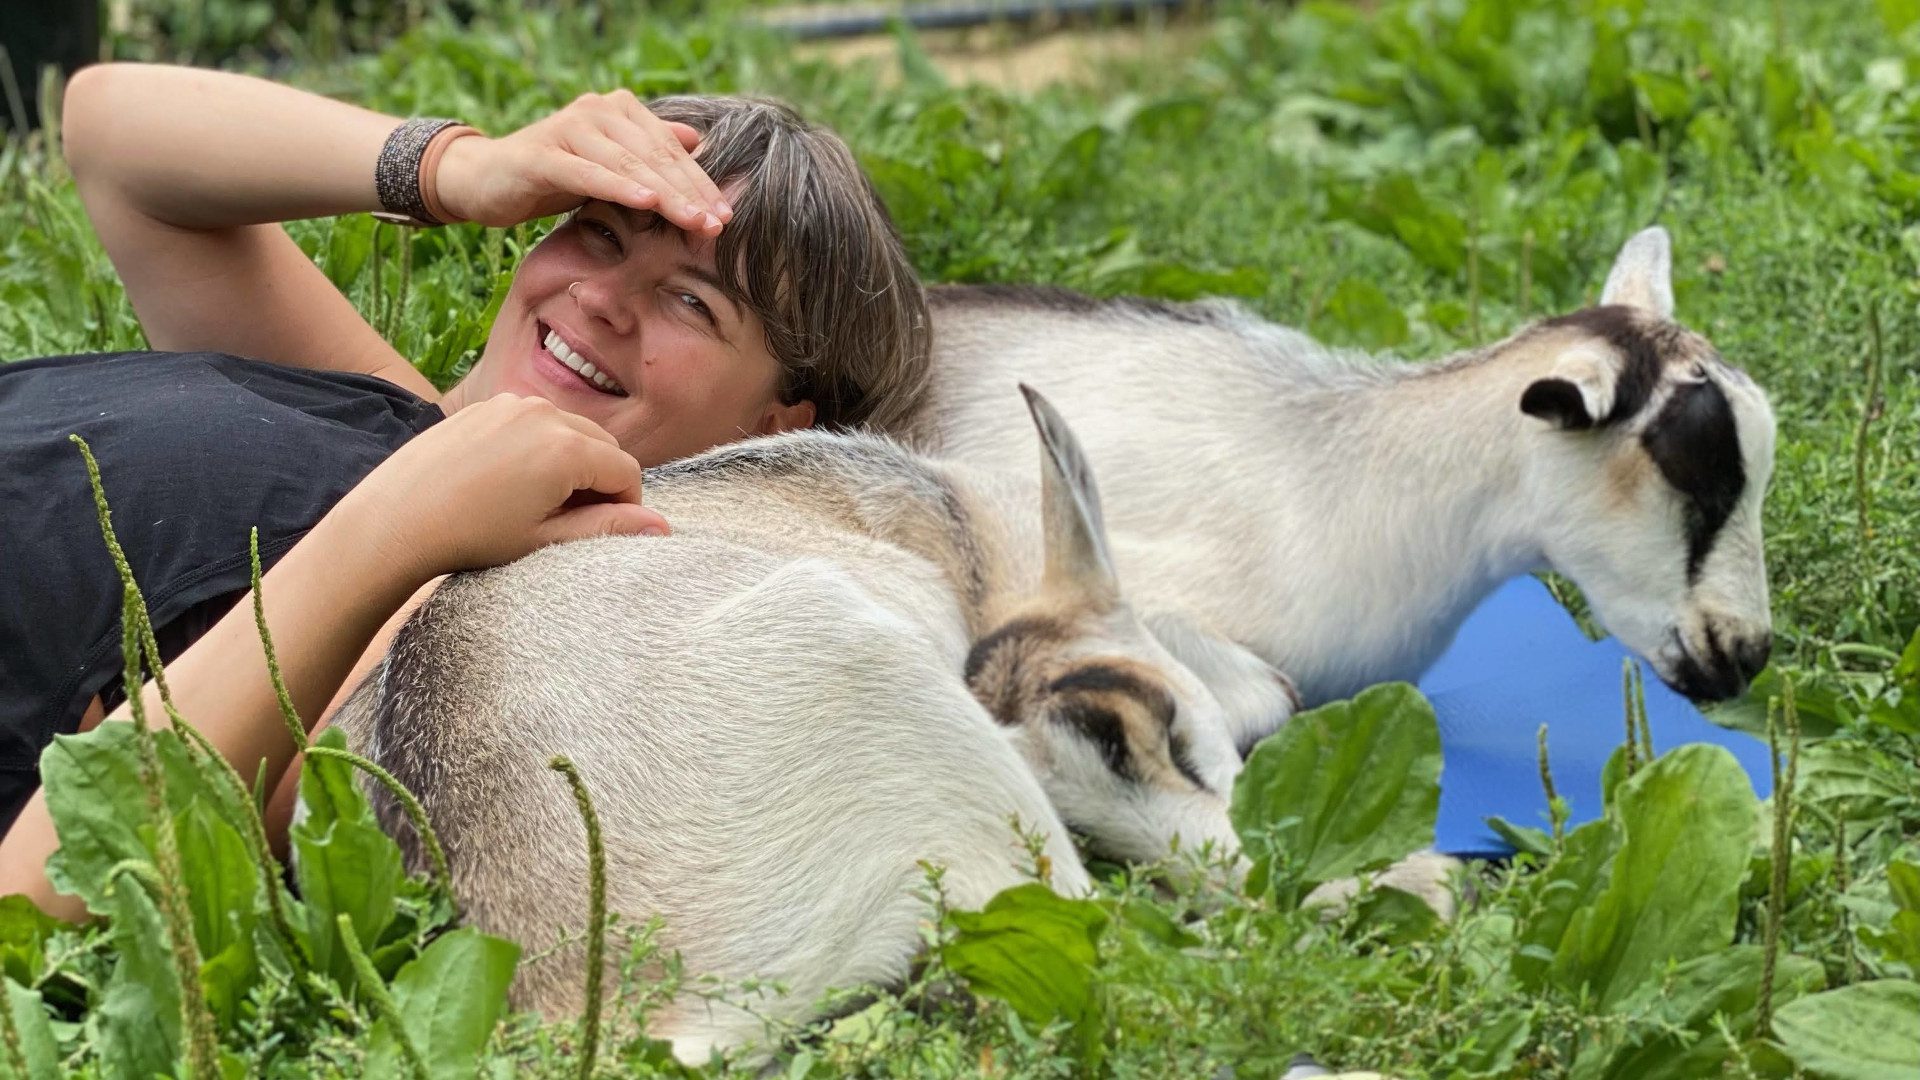 Woman relaxes head on two goats in field after goat yoga class.